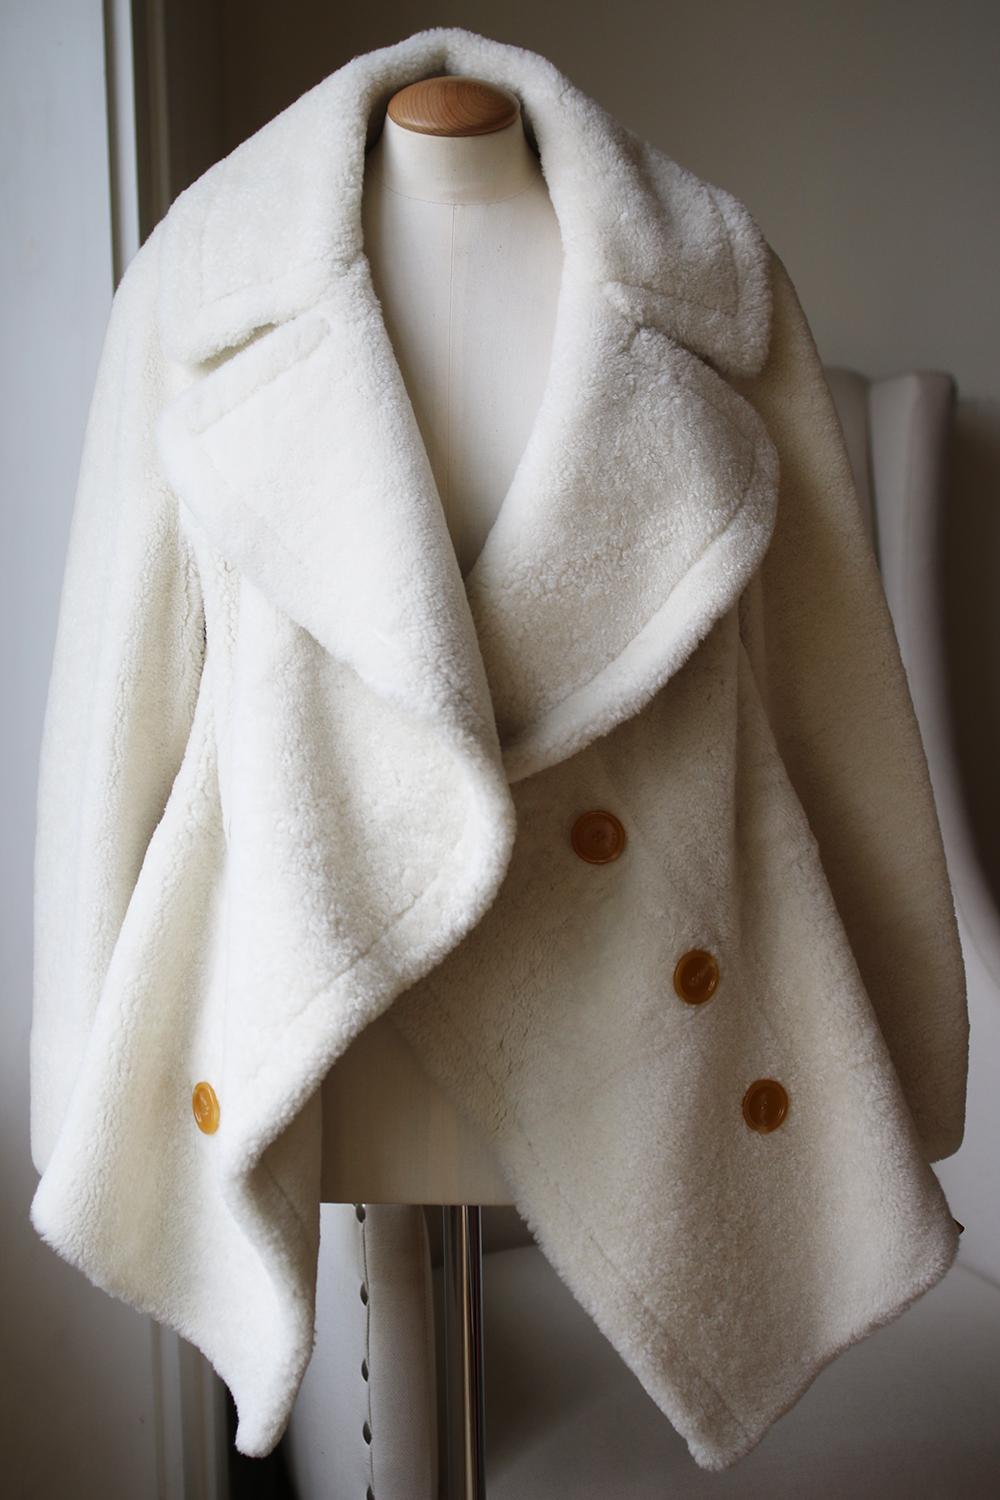 This Burberry's coat is inspired by the curved lines of Henry Moore's sculpture, It's made from thick, cozy cream shearling and has an oversized collar that falls into a softly draped front with a cotton-blend cable-knit back creates a